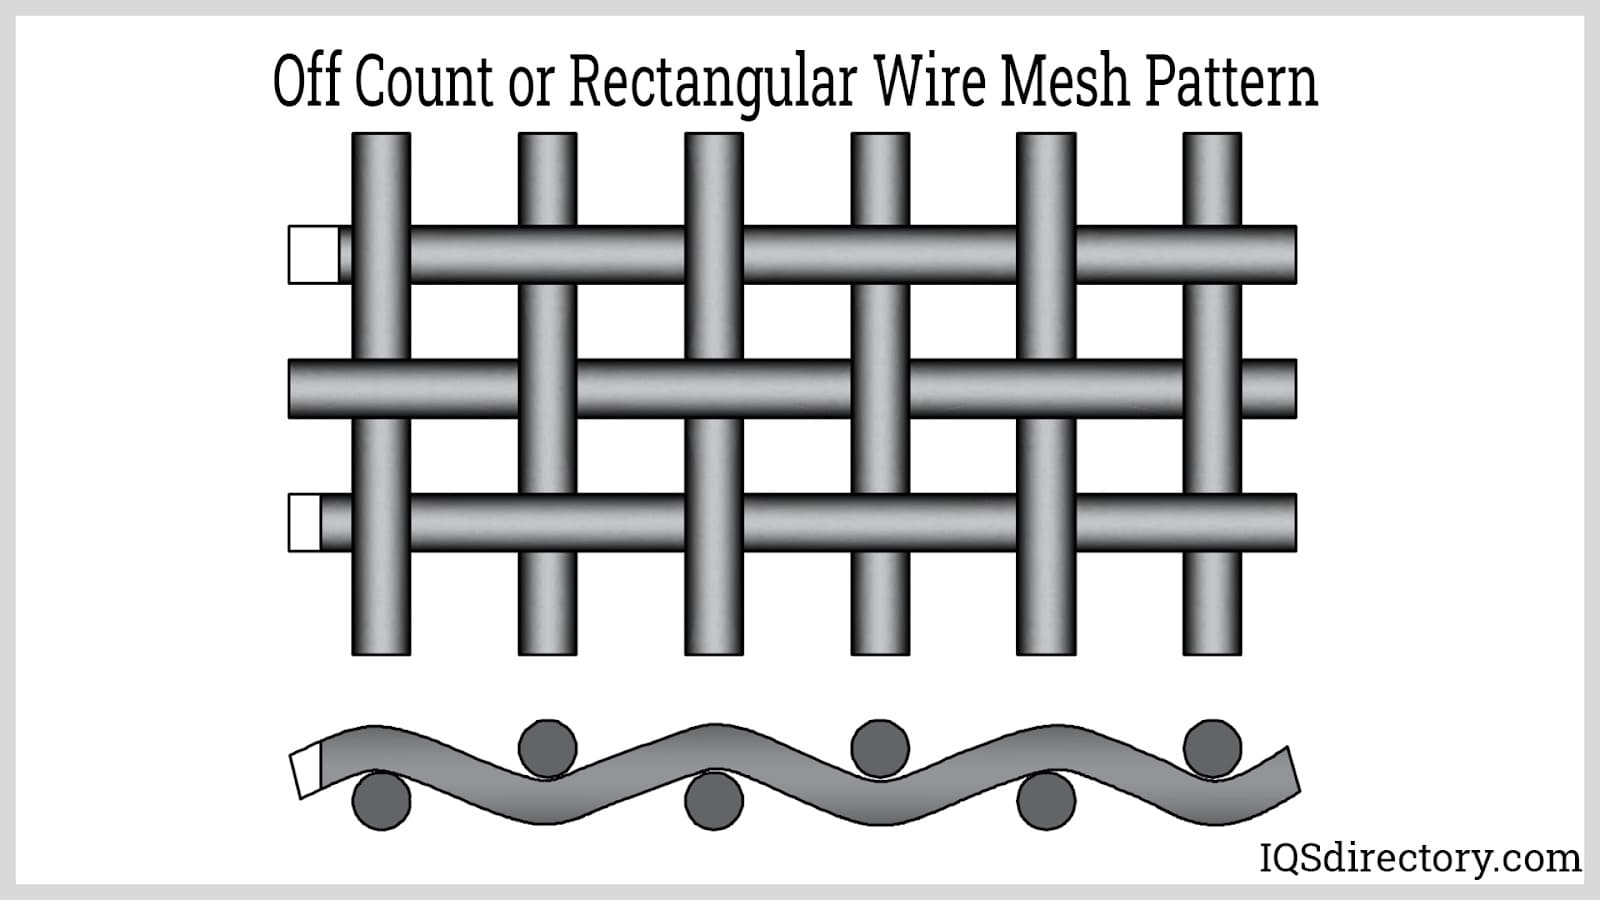 Off Count or Rectangular Wire Mesh Pattern